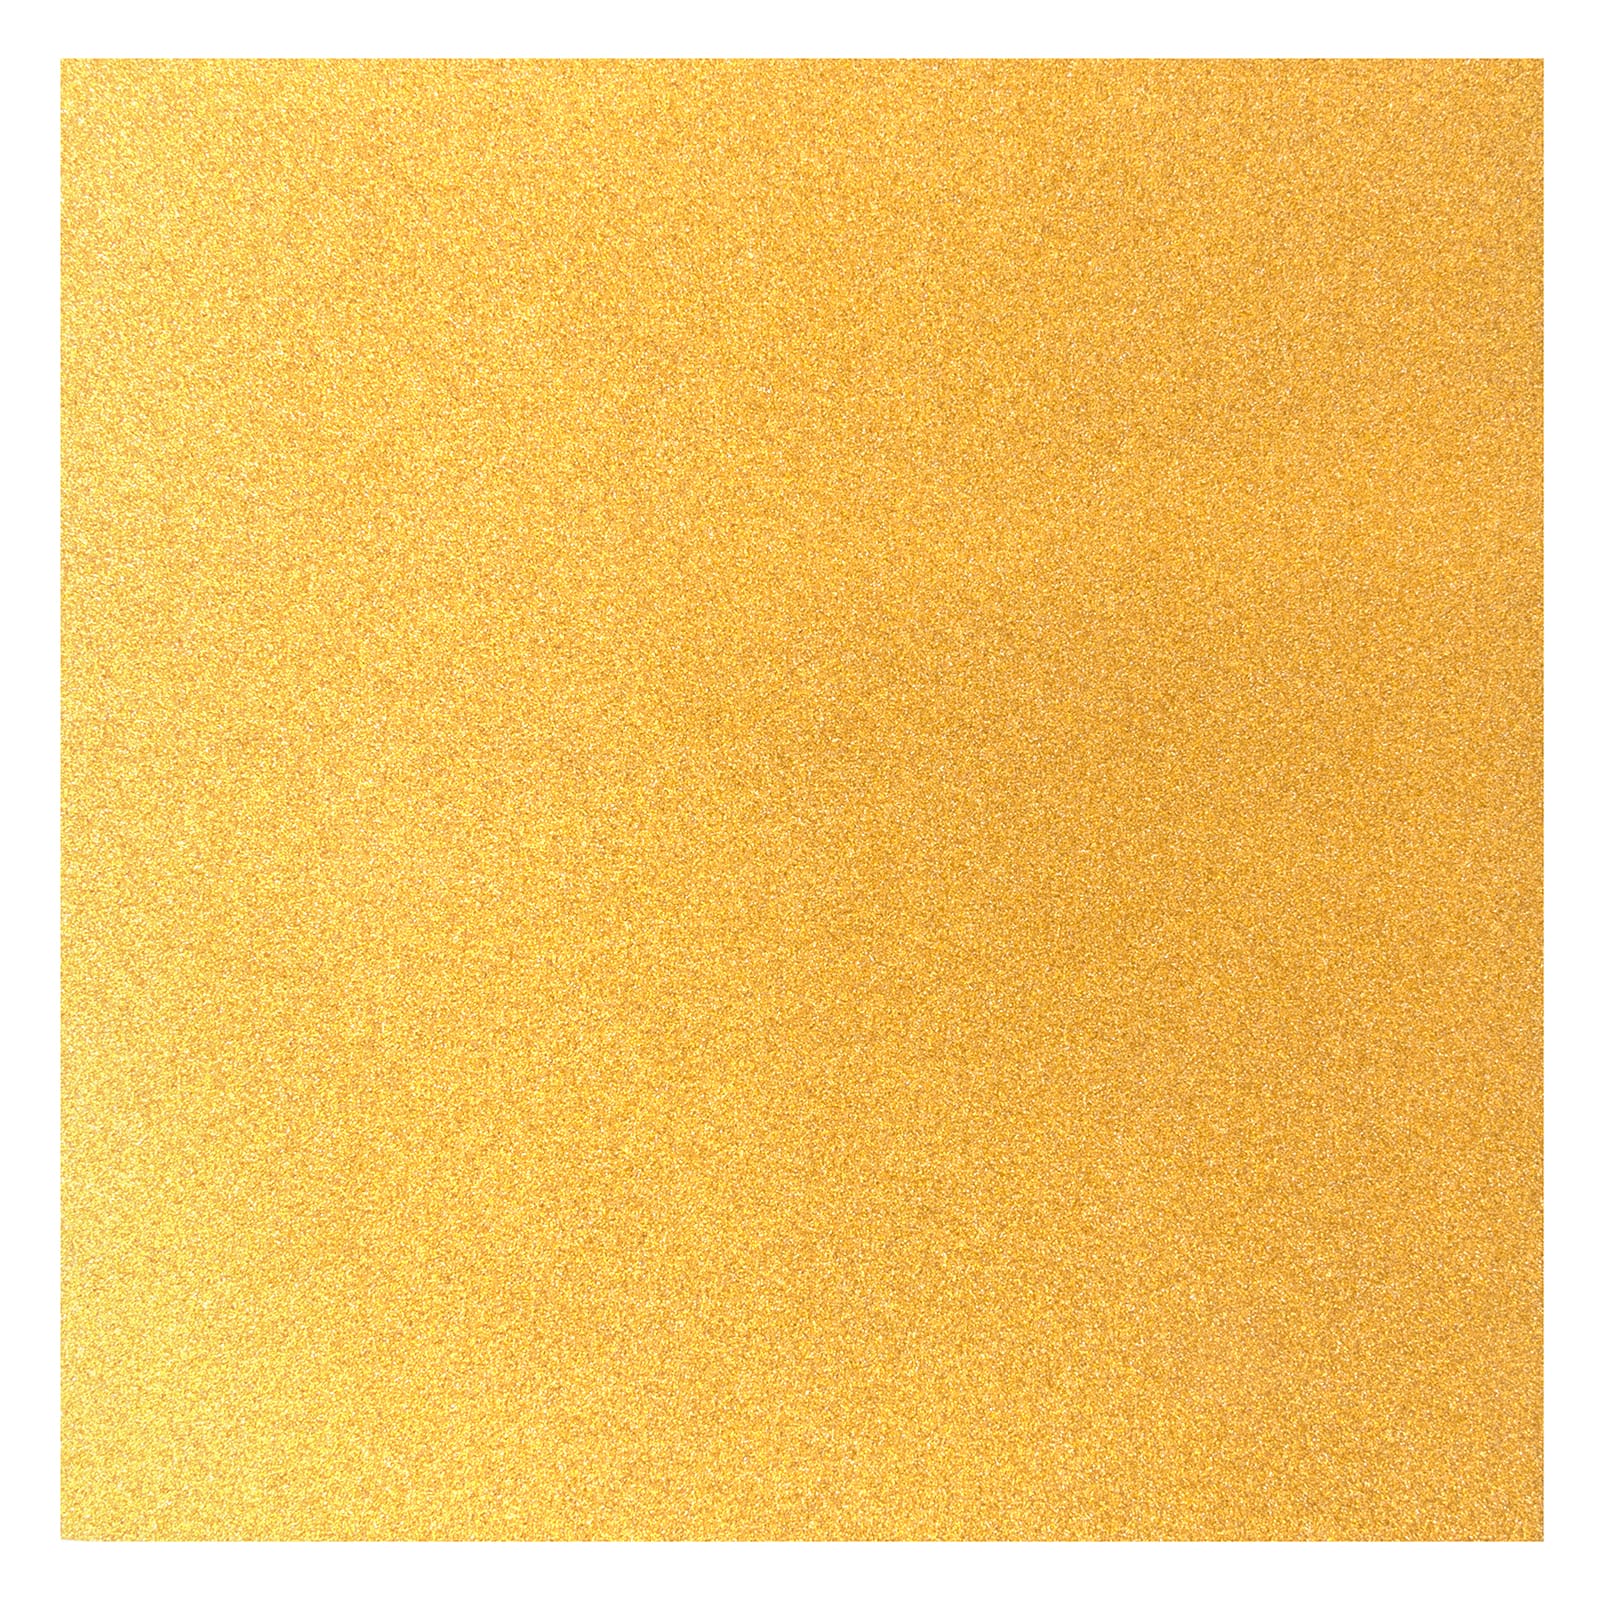 Gold Glitter Shimmer Paper by Recollections 12 x 12 | Michaels